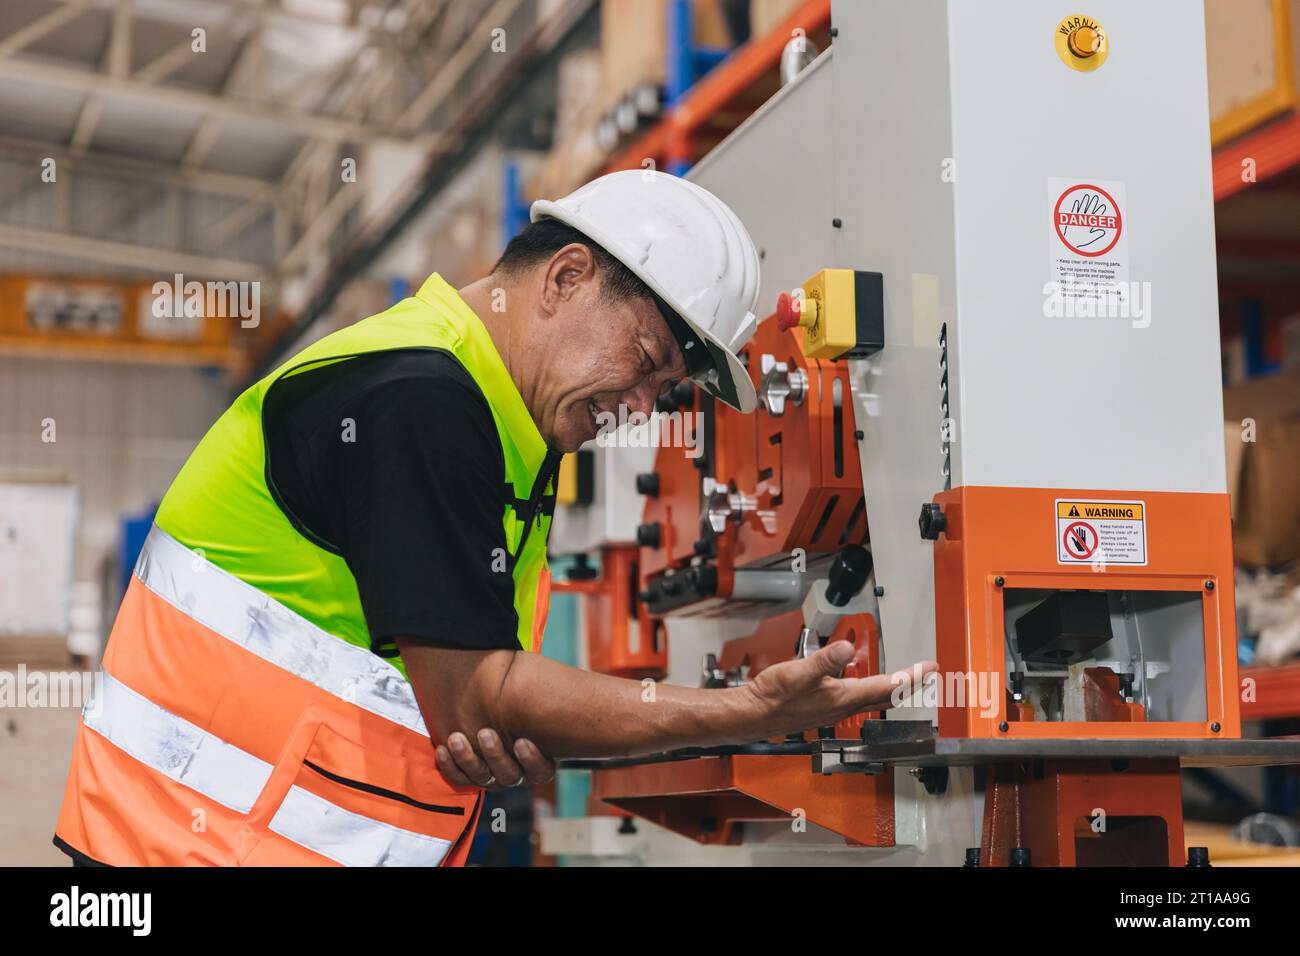 Senior male worker serious accident machine hand clamp injury in industry workplace need emergency medical help Stock Photo